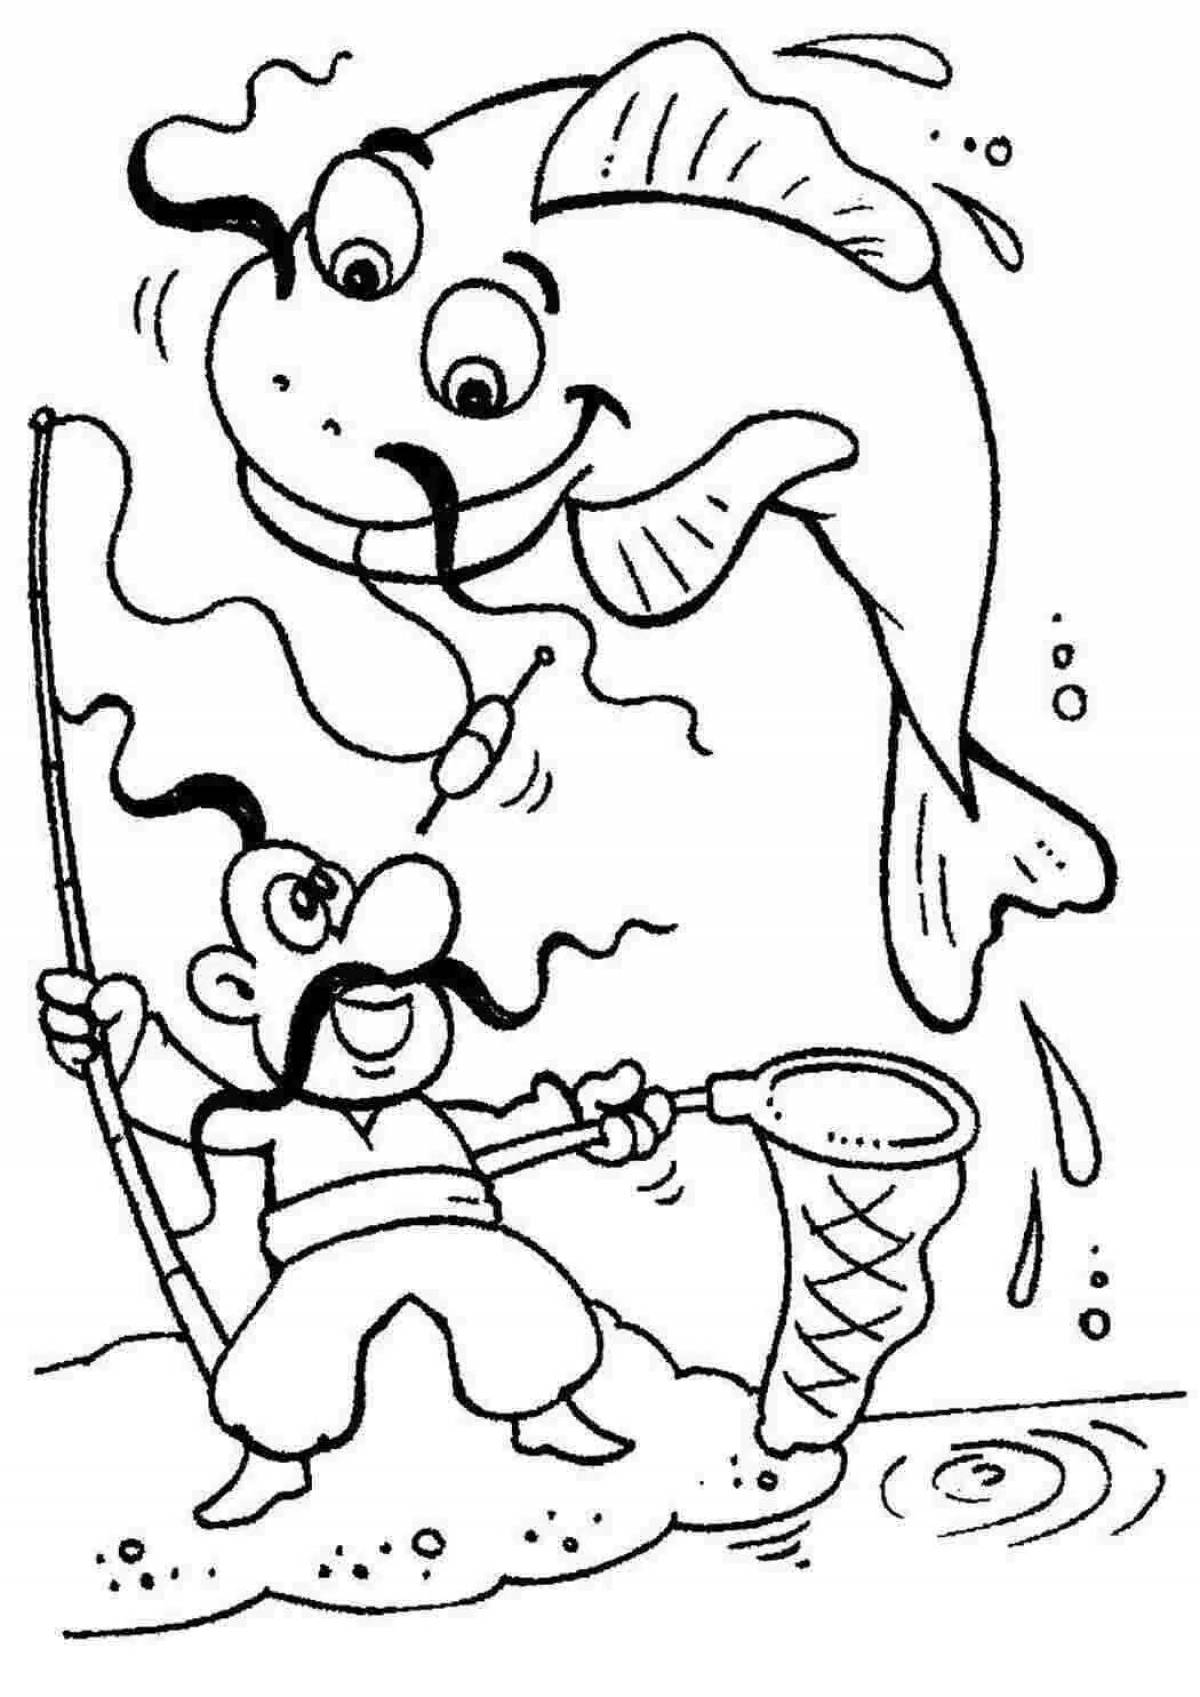 A wonderful fisherman coloring for children